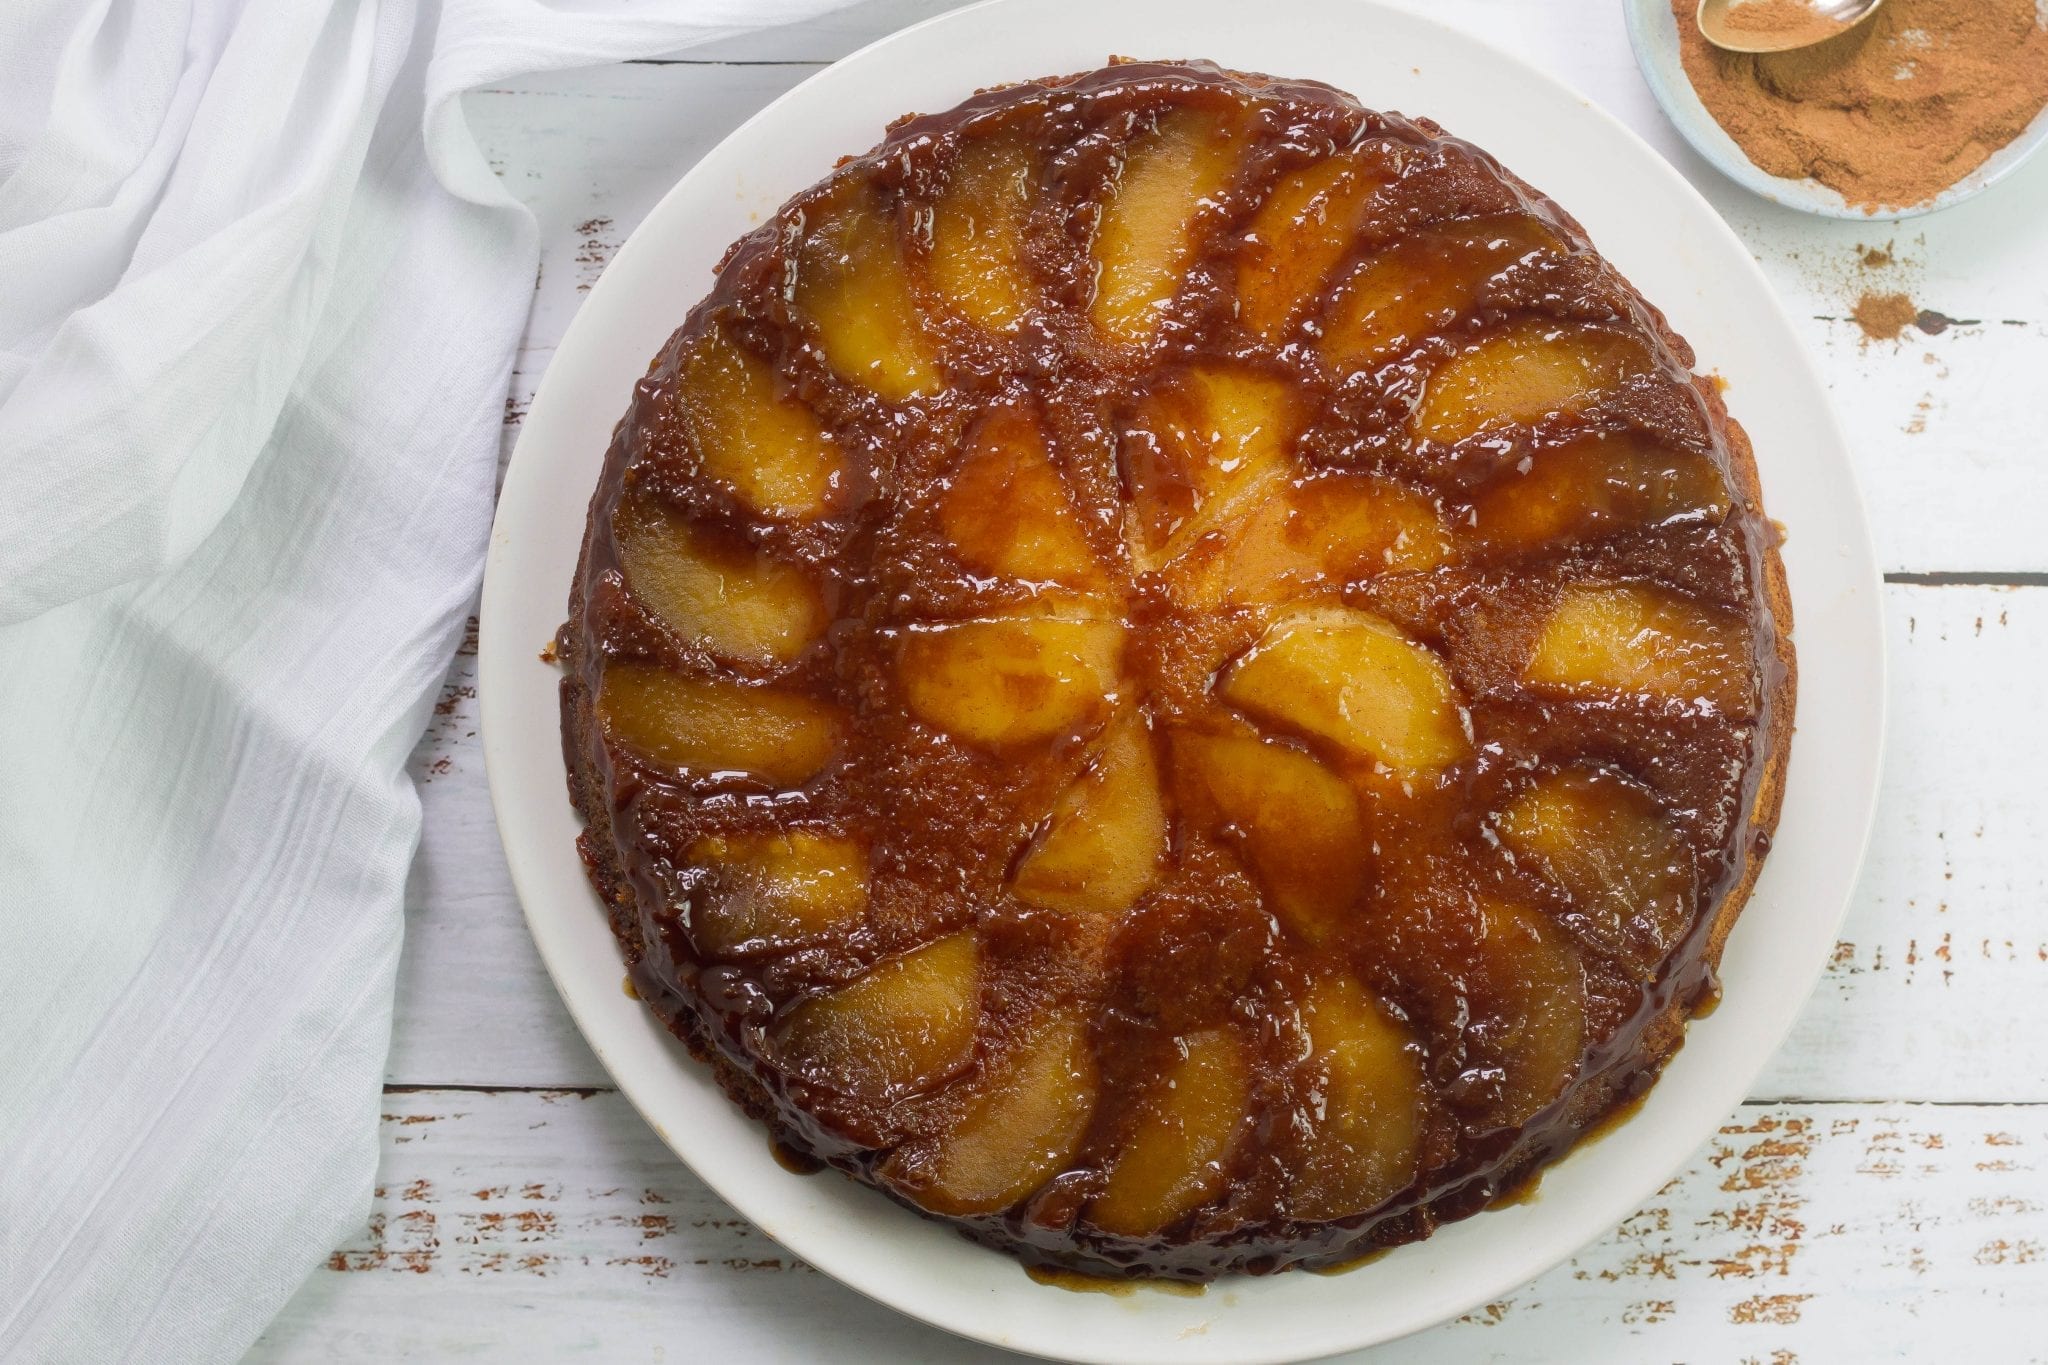 https://masandpas.com/wp-content/uploads/2019/01/The-best-caramel-apple-upside-down-cake-bake-it-with-the-kids-and-flip-it-over-to-enjoy-for-tea-tme-5.jpg